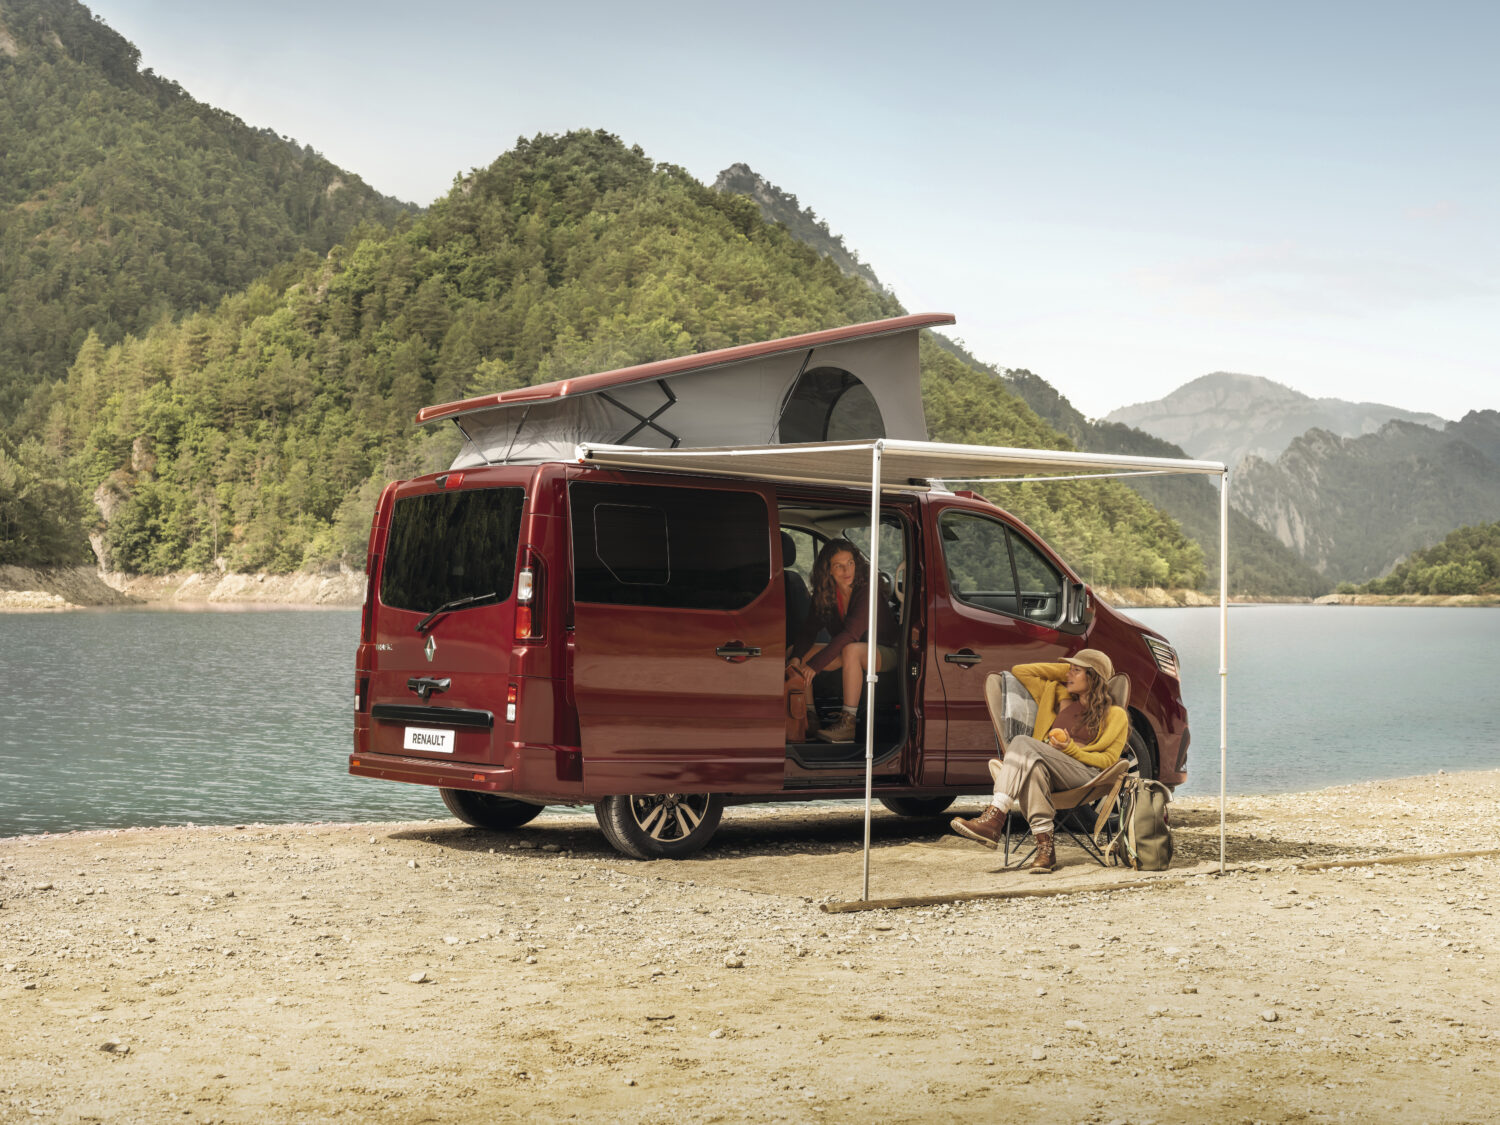 2022 - Story - All-new Renault Trafic SpaceNomad_ your place in the sun